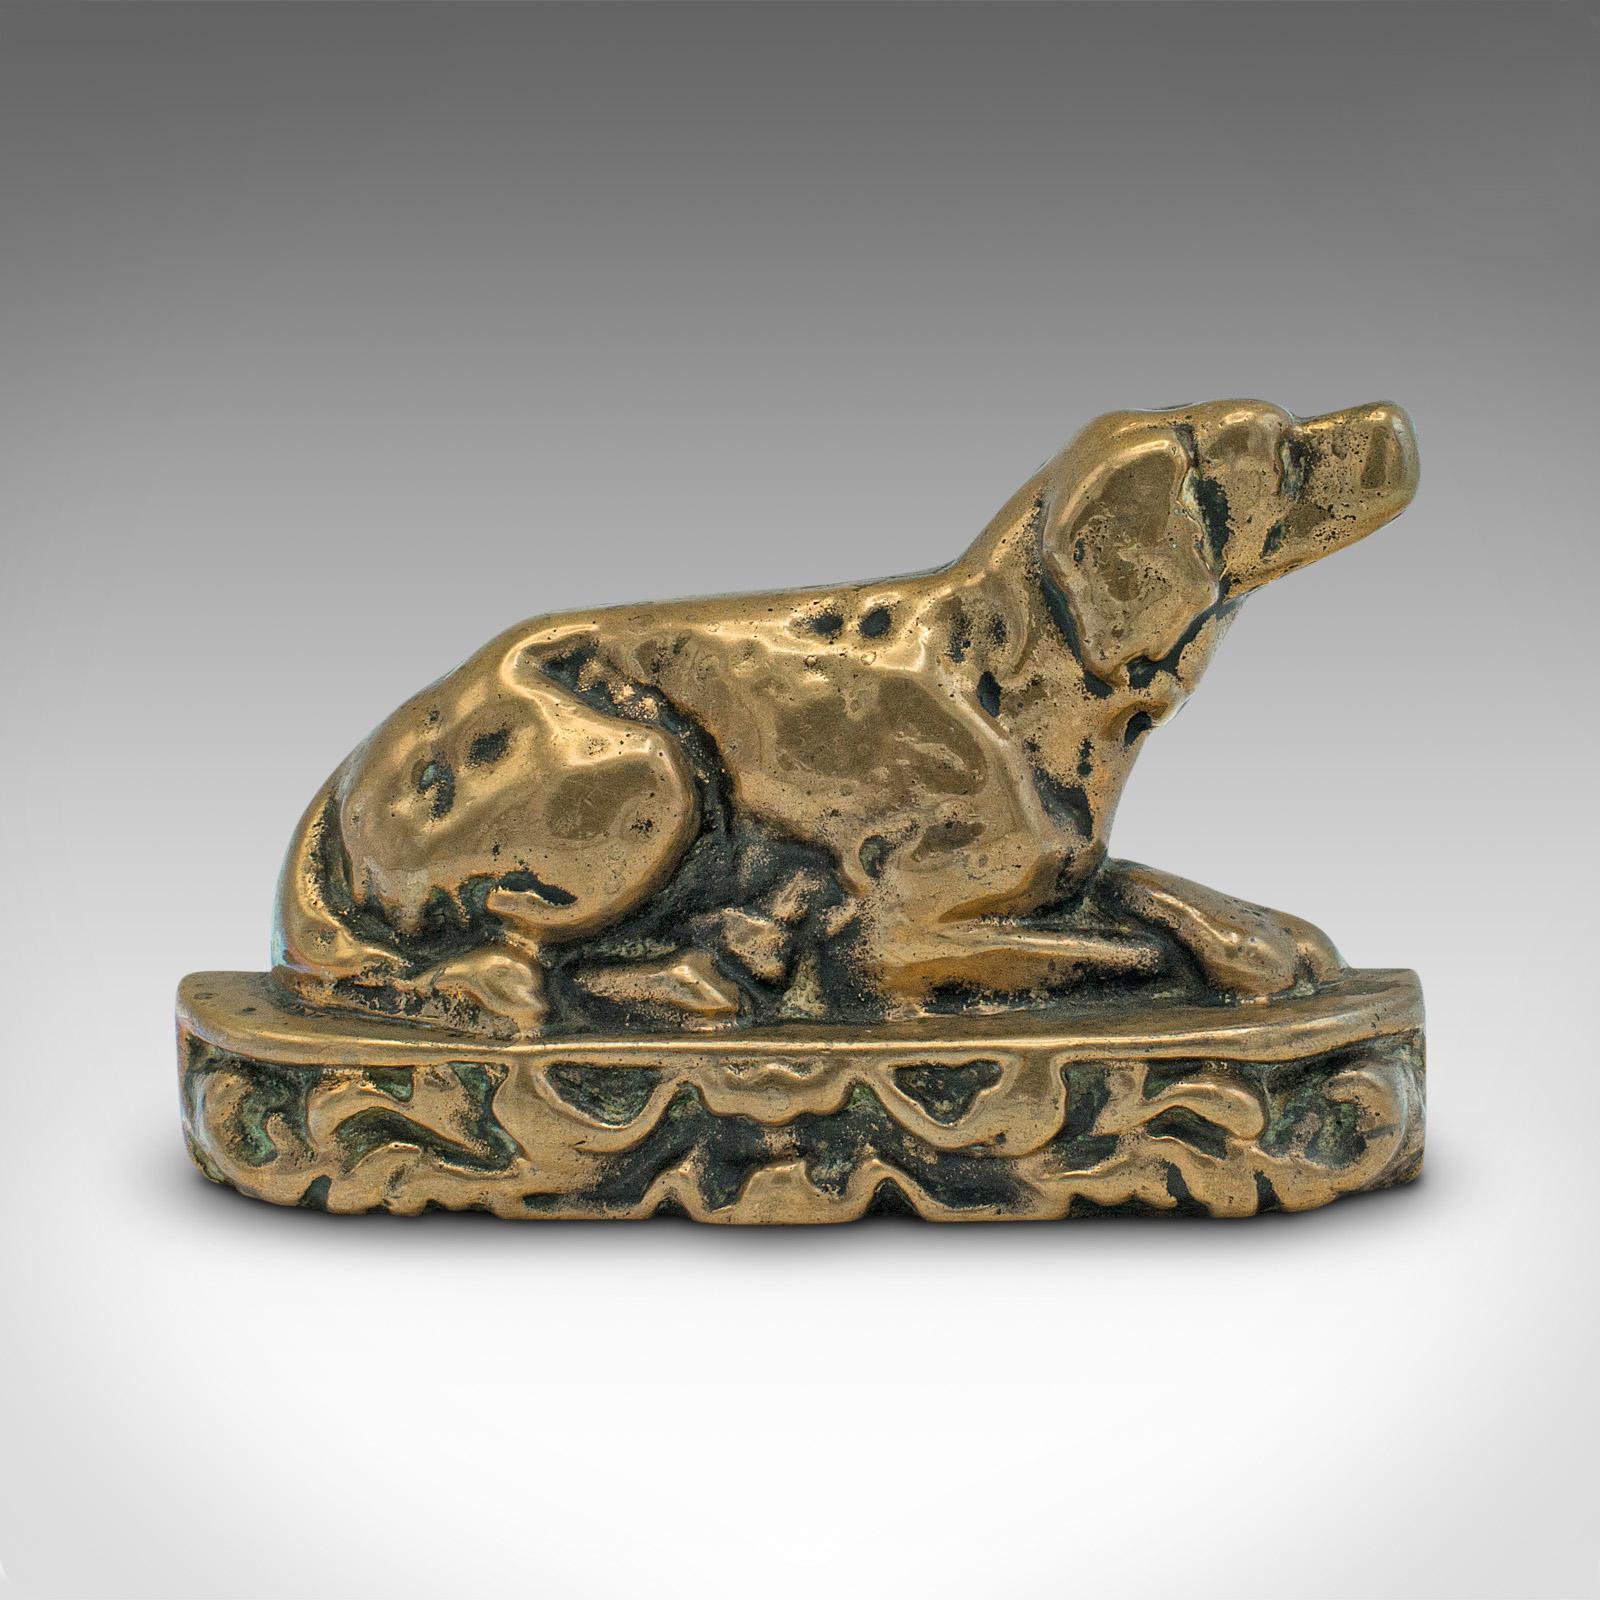 This is a small antique decorative door stop. An English, bronze doorstopper in Labrador Retriever form, dating to the late Victorian period, circa 1900.

Of pleasing weight and wonderfully polished appearance
Displays a desirable aged patina and